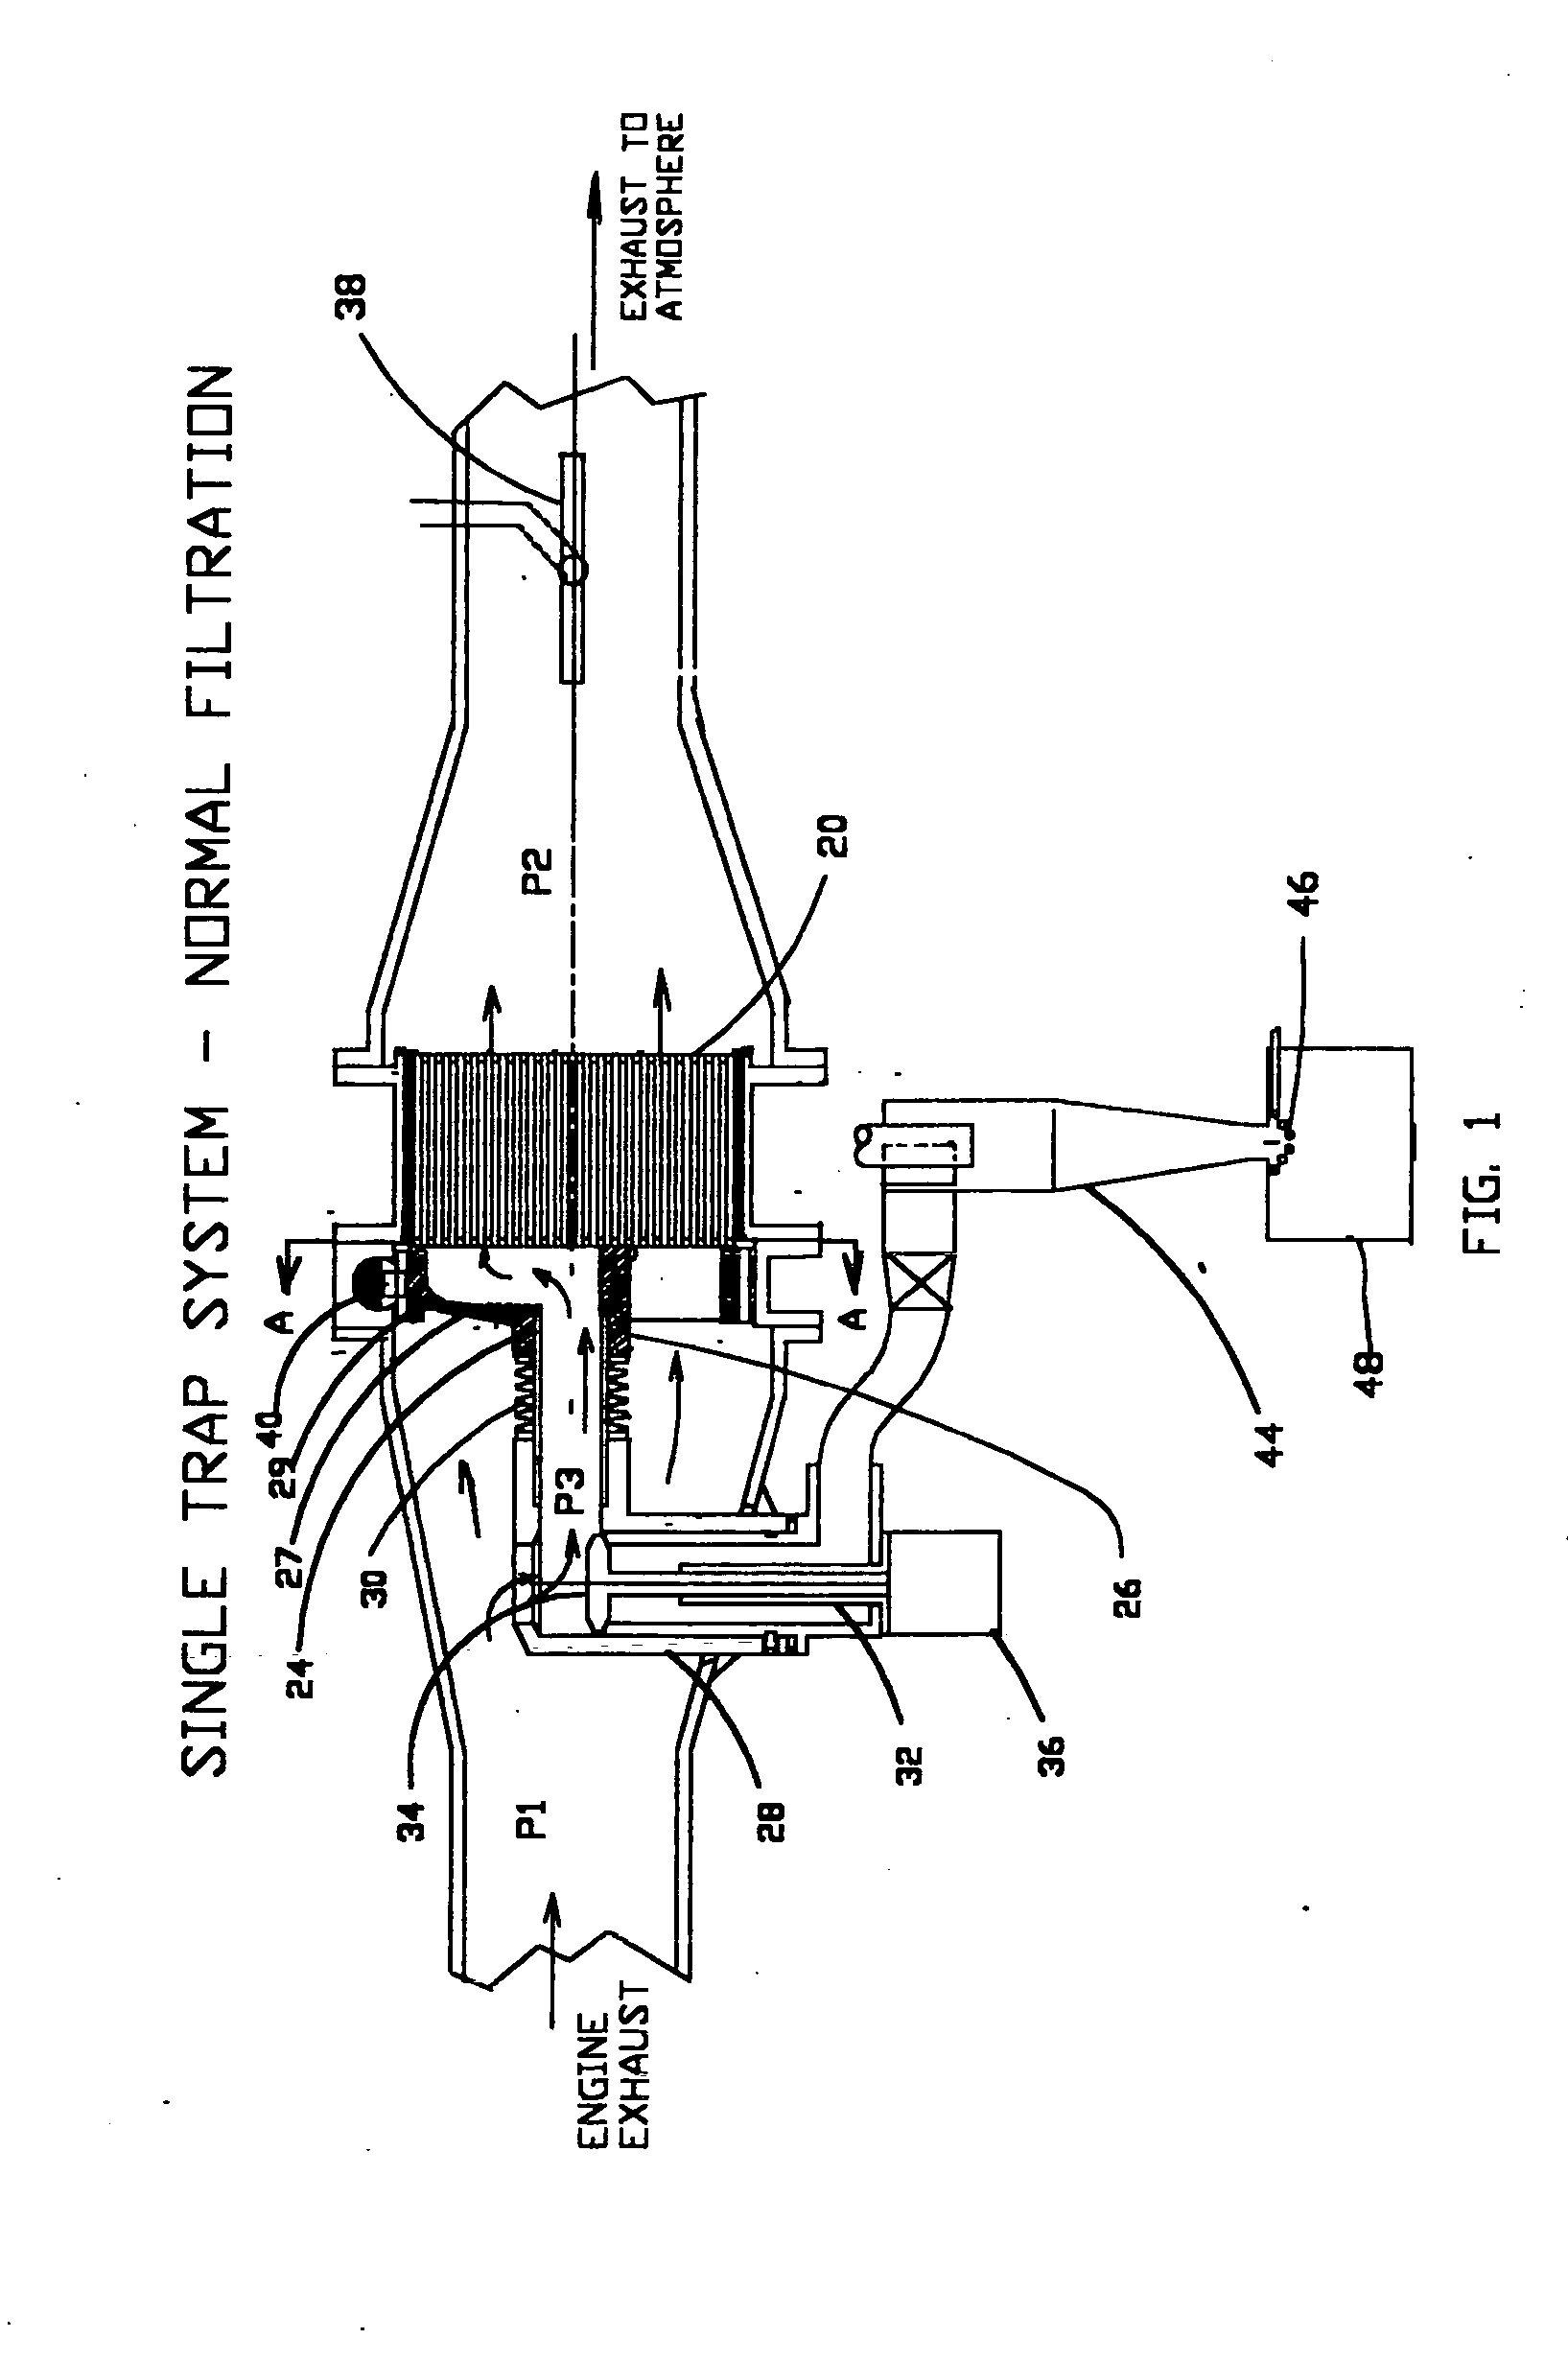 Particulate trap system and method